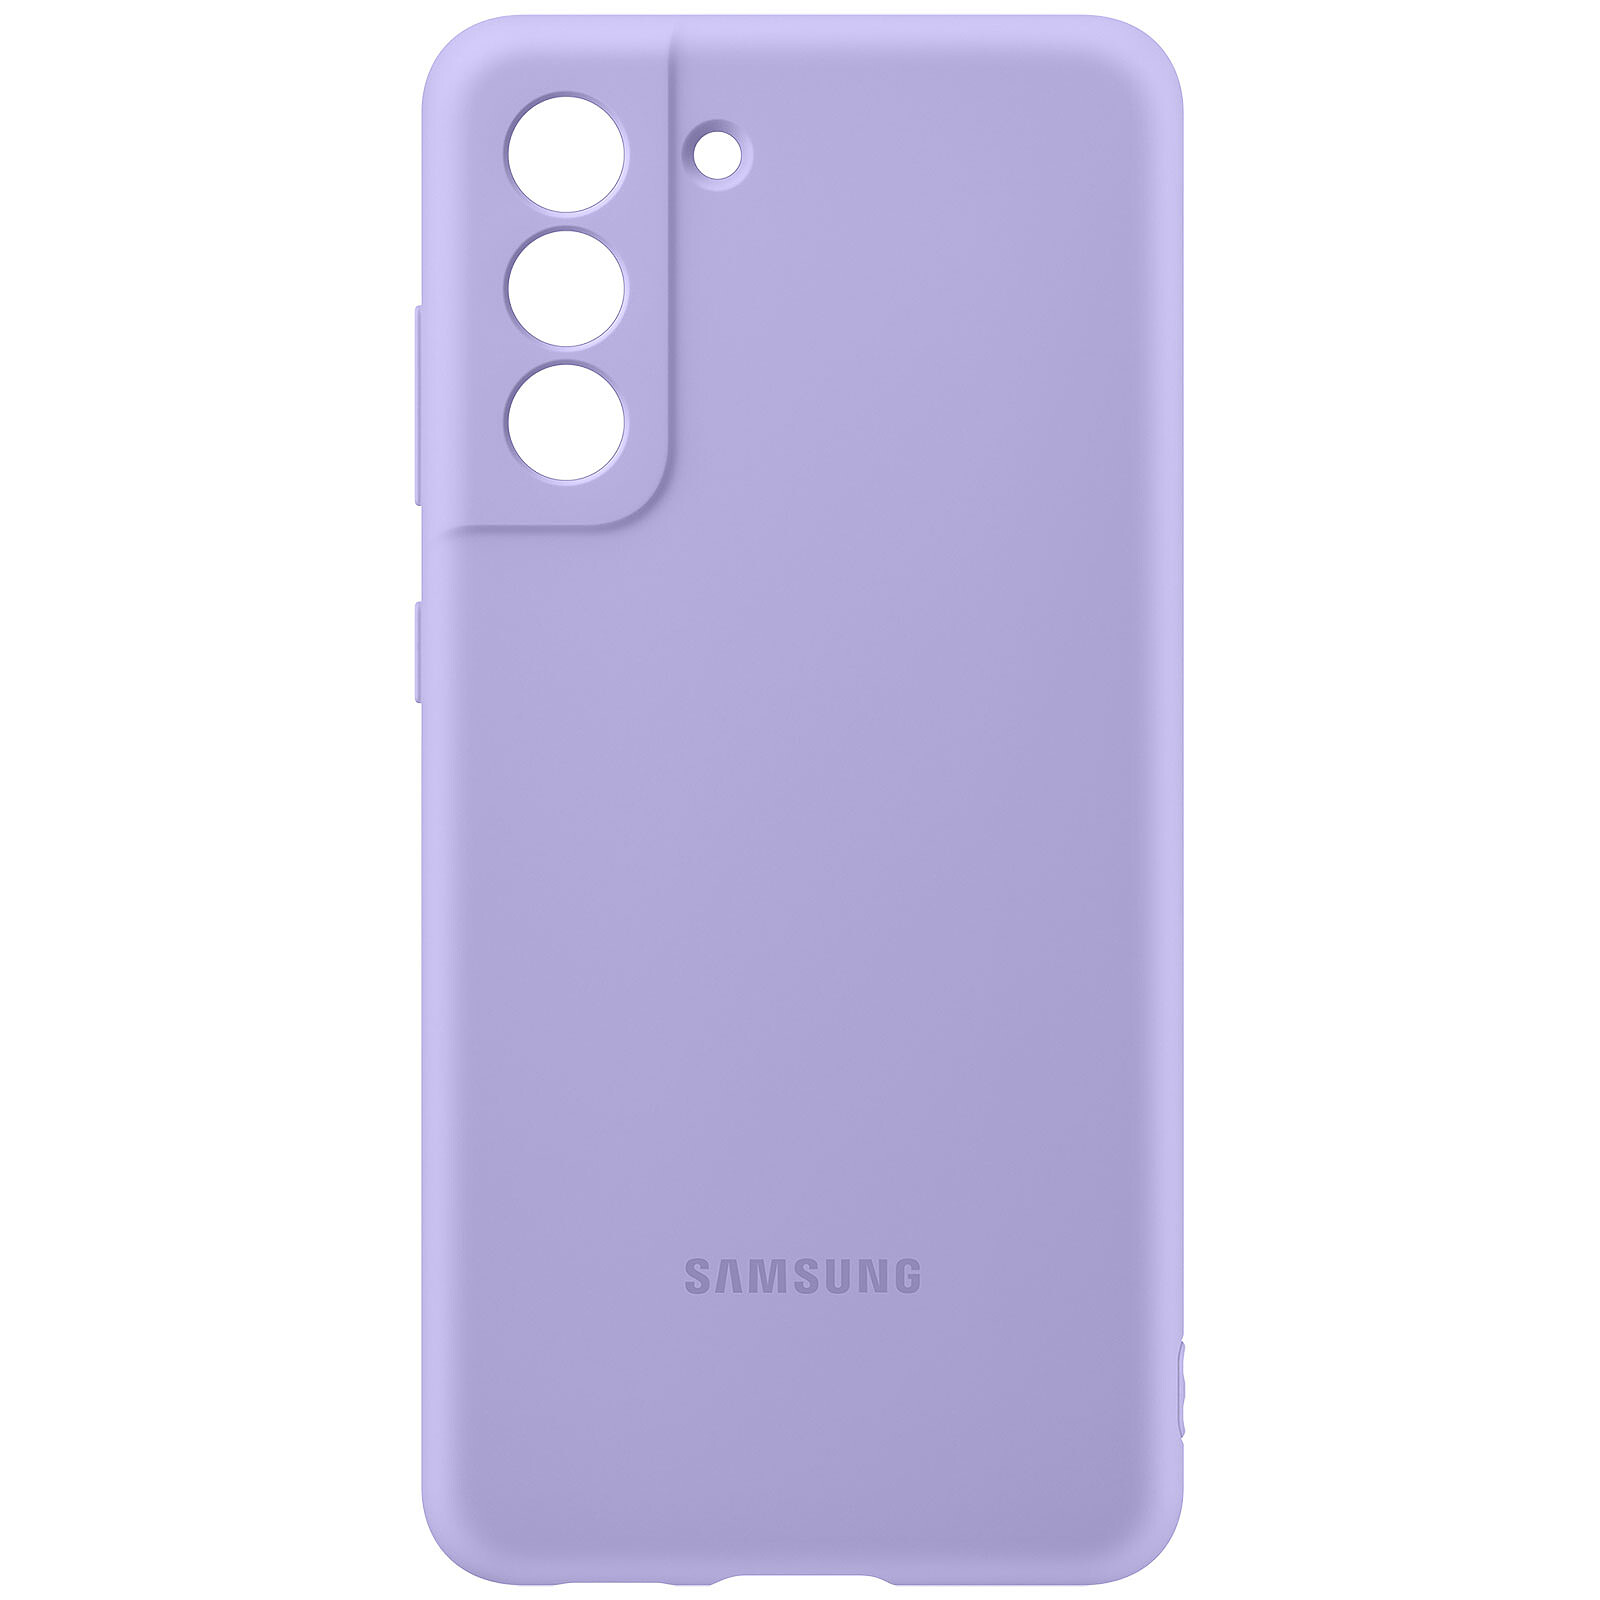 Samsung Galaxy S21 FE Silicone Cover Lavender - Phone case Samsung on LDLC